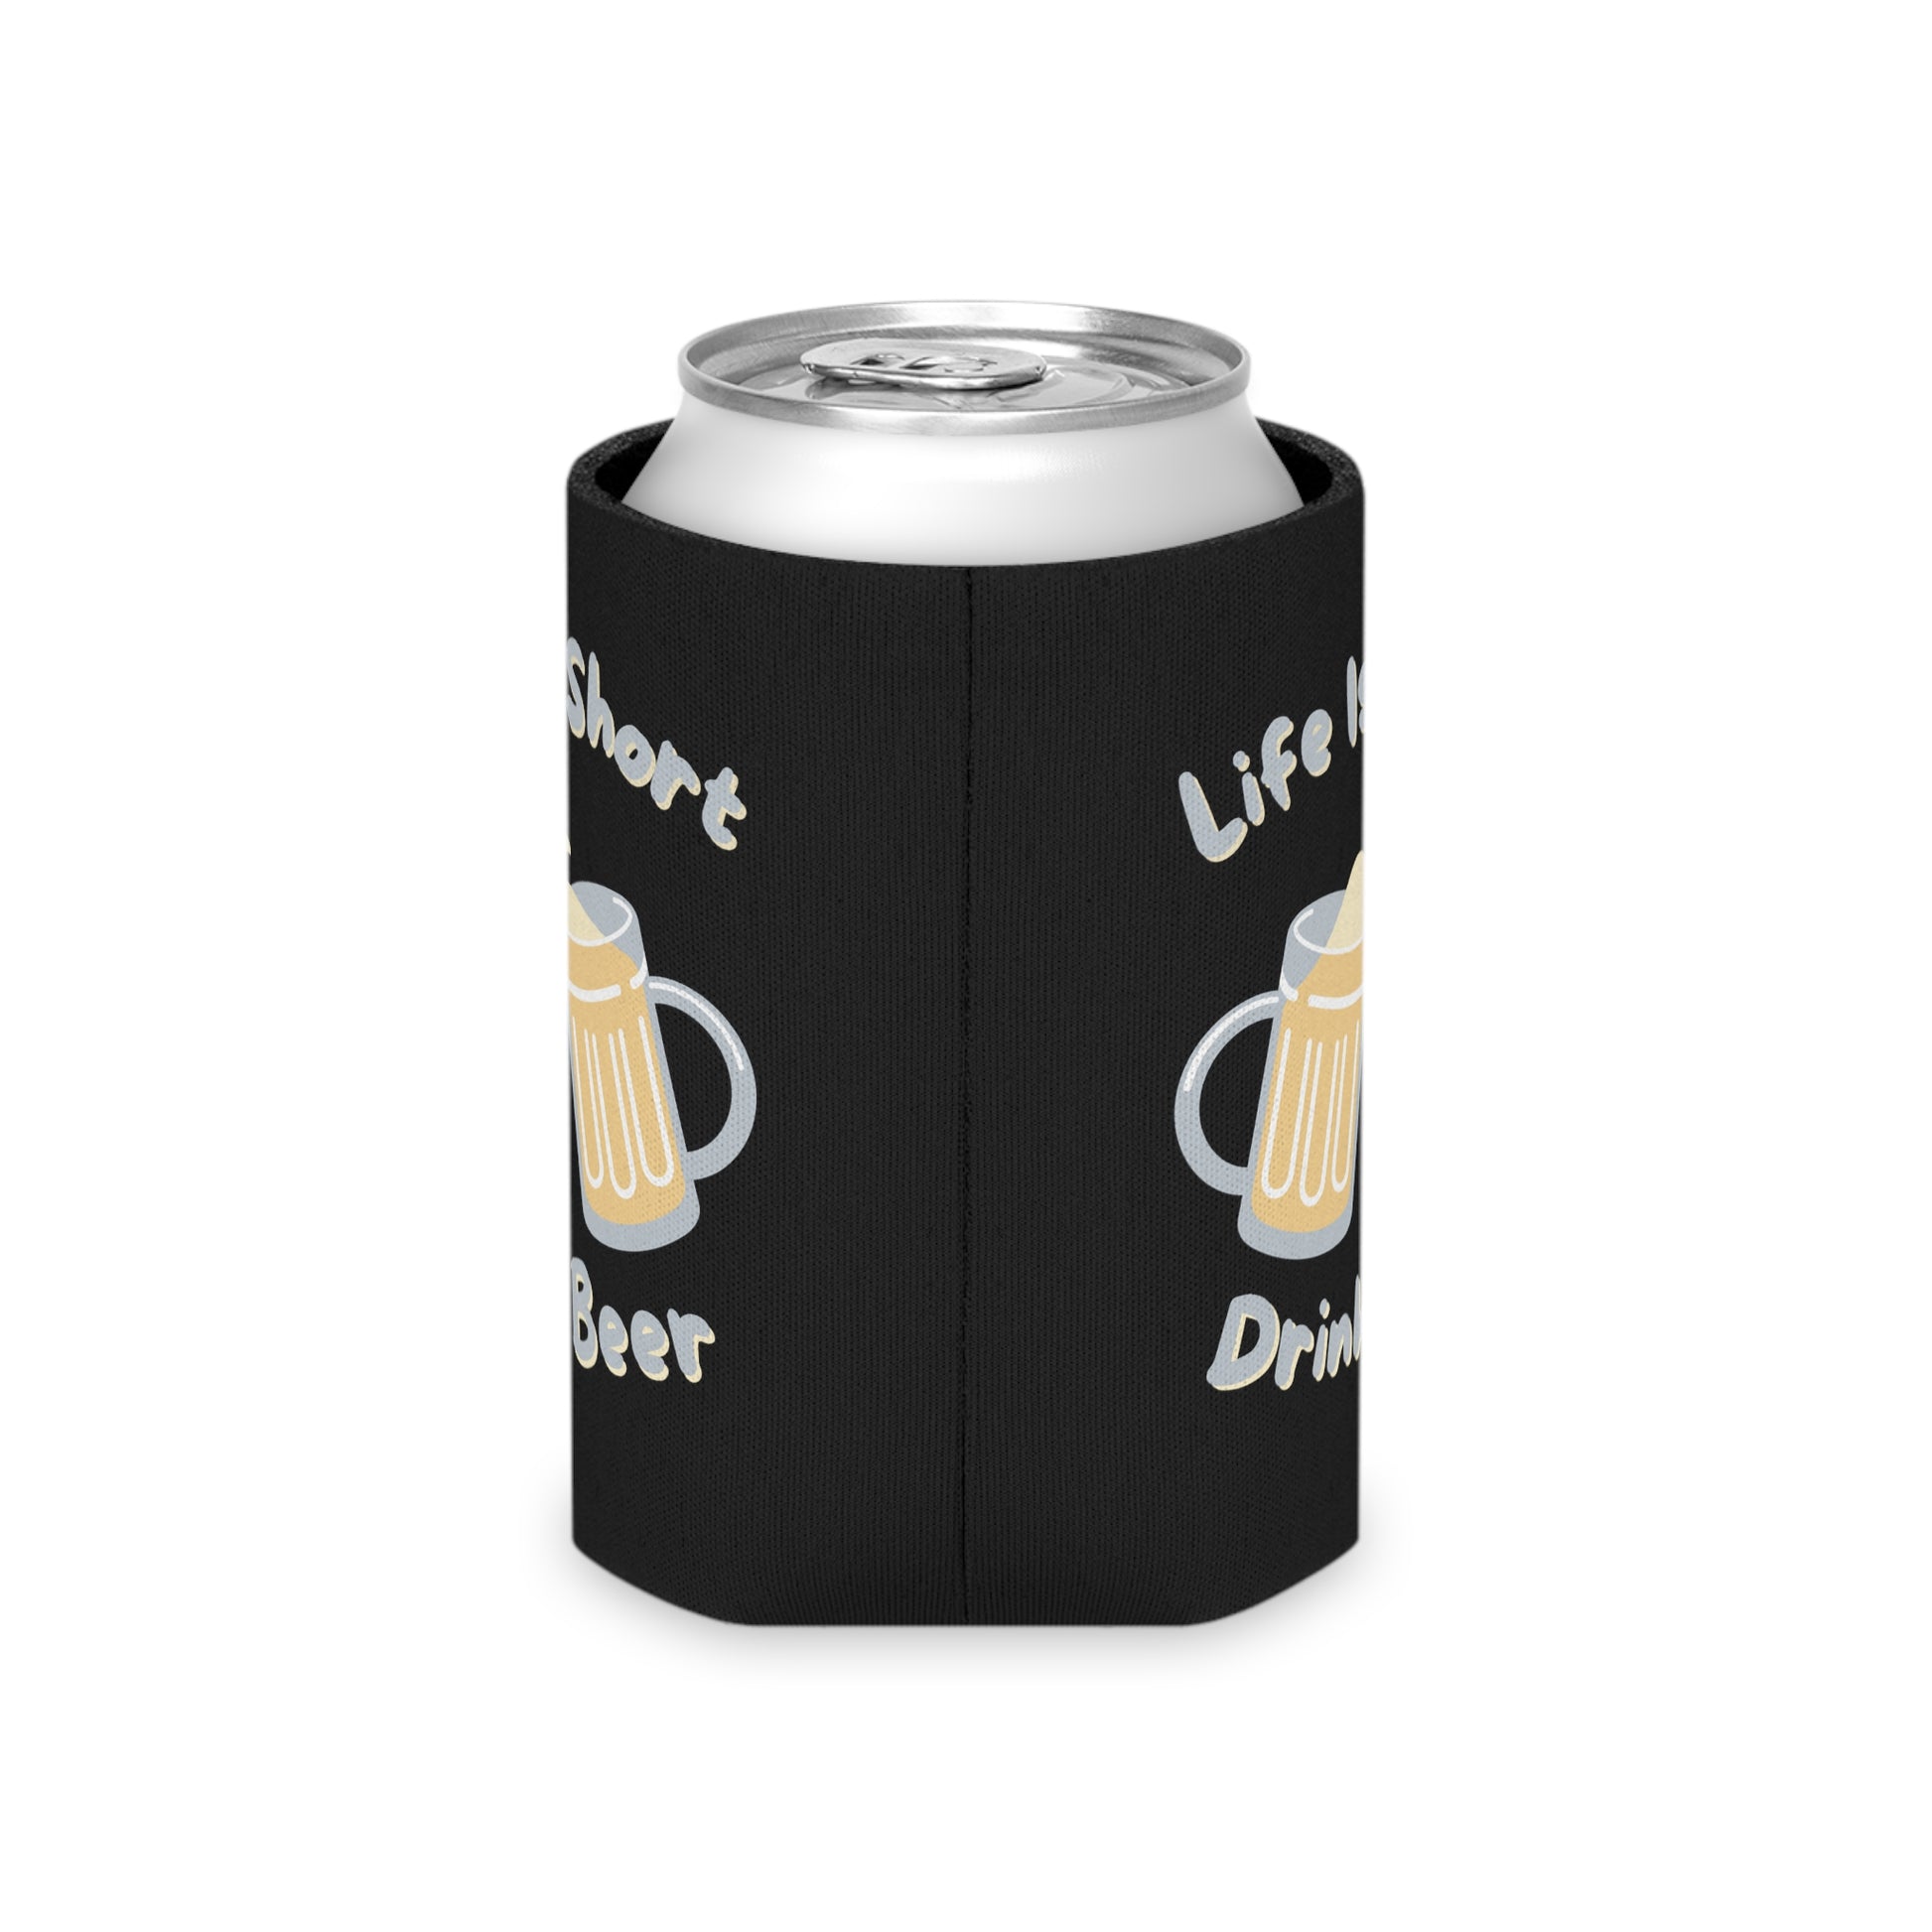 "Life Is Short, Drink Beer" Can Cooler - Weave Got Gifts - Unique Gifts You Won’t Find Anywhere Else!